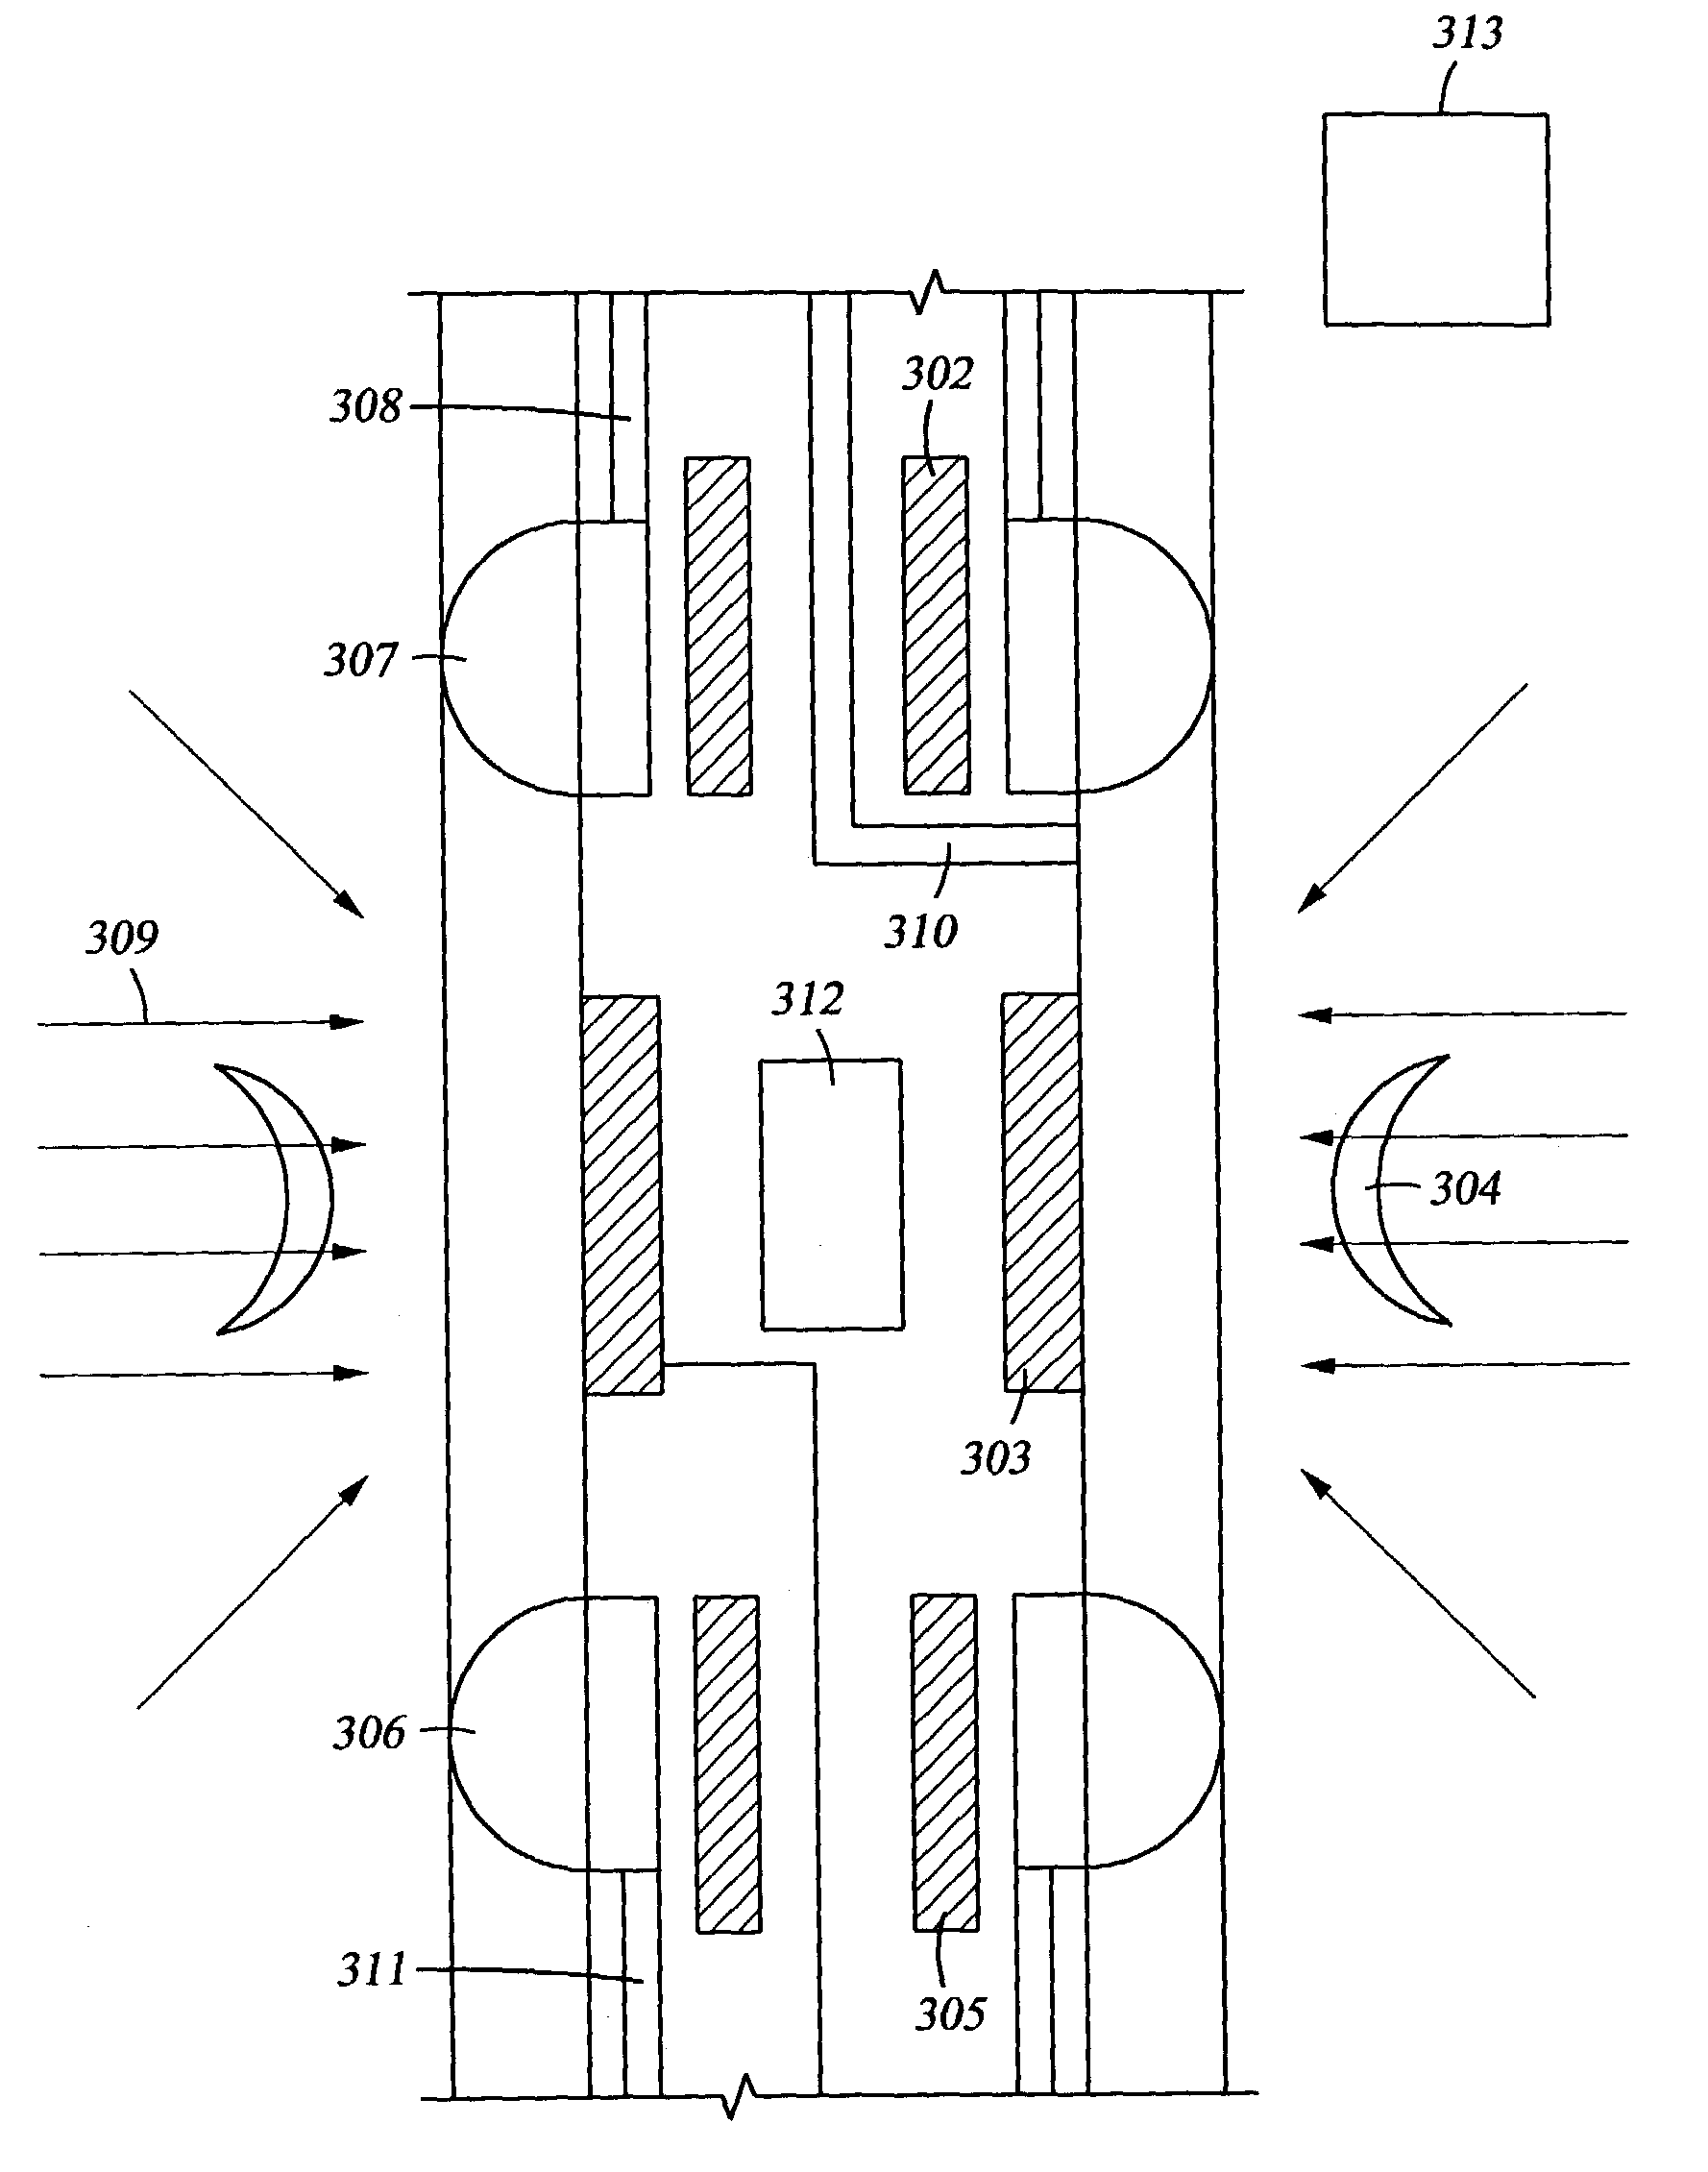 Method and apparatus for combined NMR and formation testing for assessing relative permeability with formation testing and nuclear magnetic resonance testing